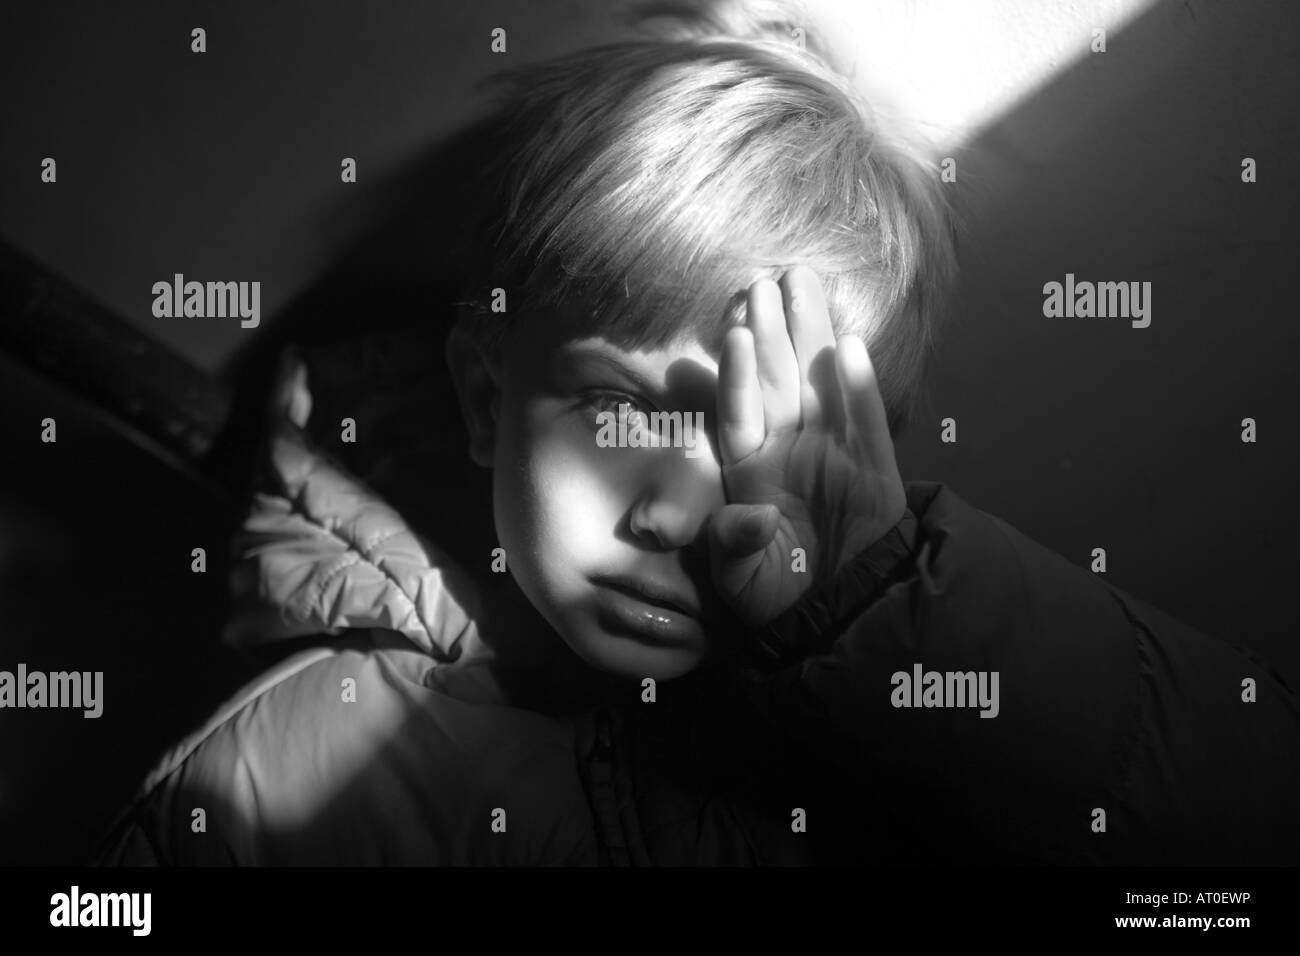 Young boy looking sad in black and white with dramatic light Stock Photo